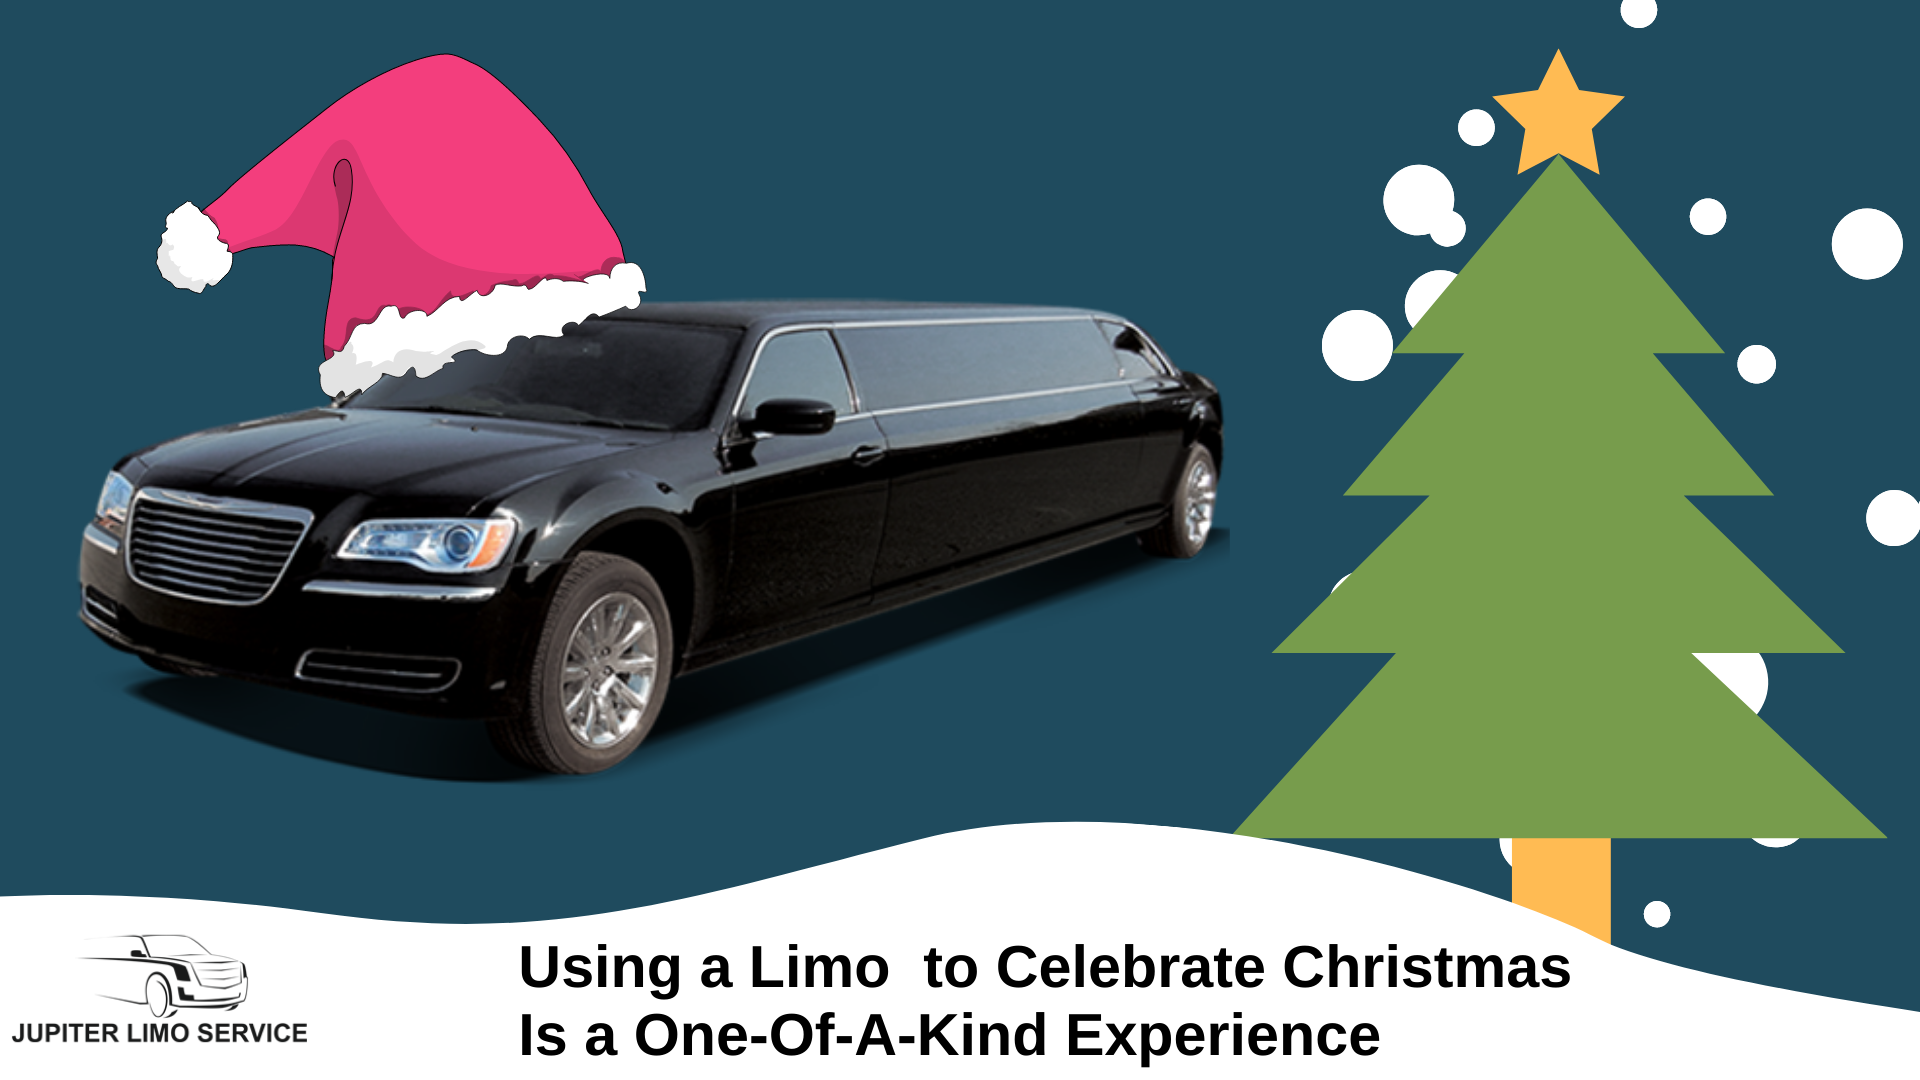 Using a Limo to Celebrate Christmas Is a One-Of-A-Kind Experience